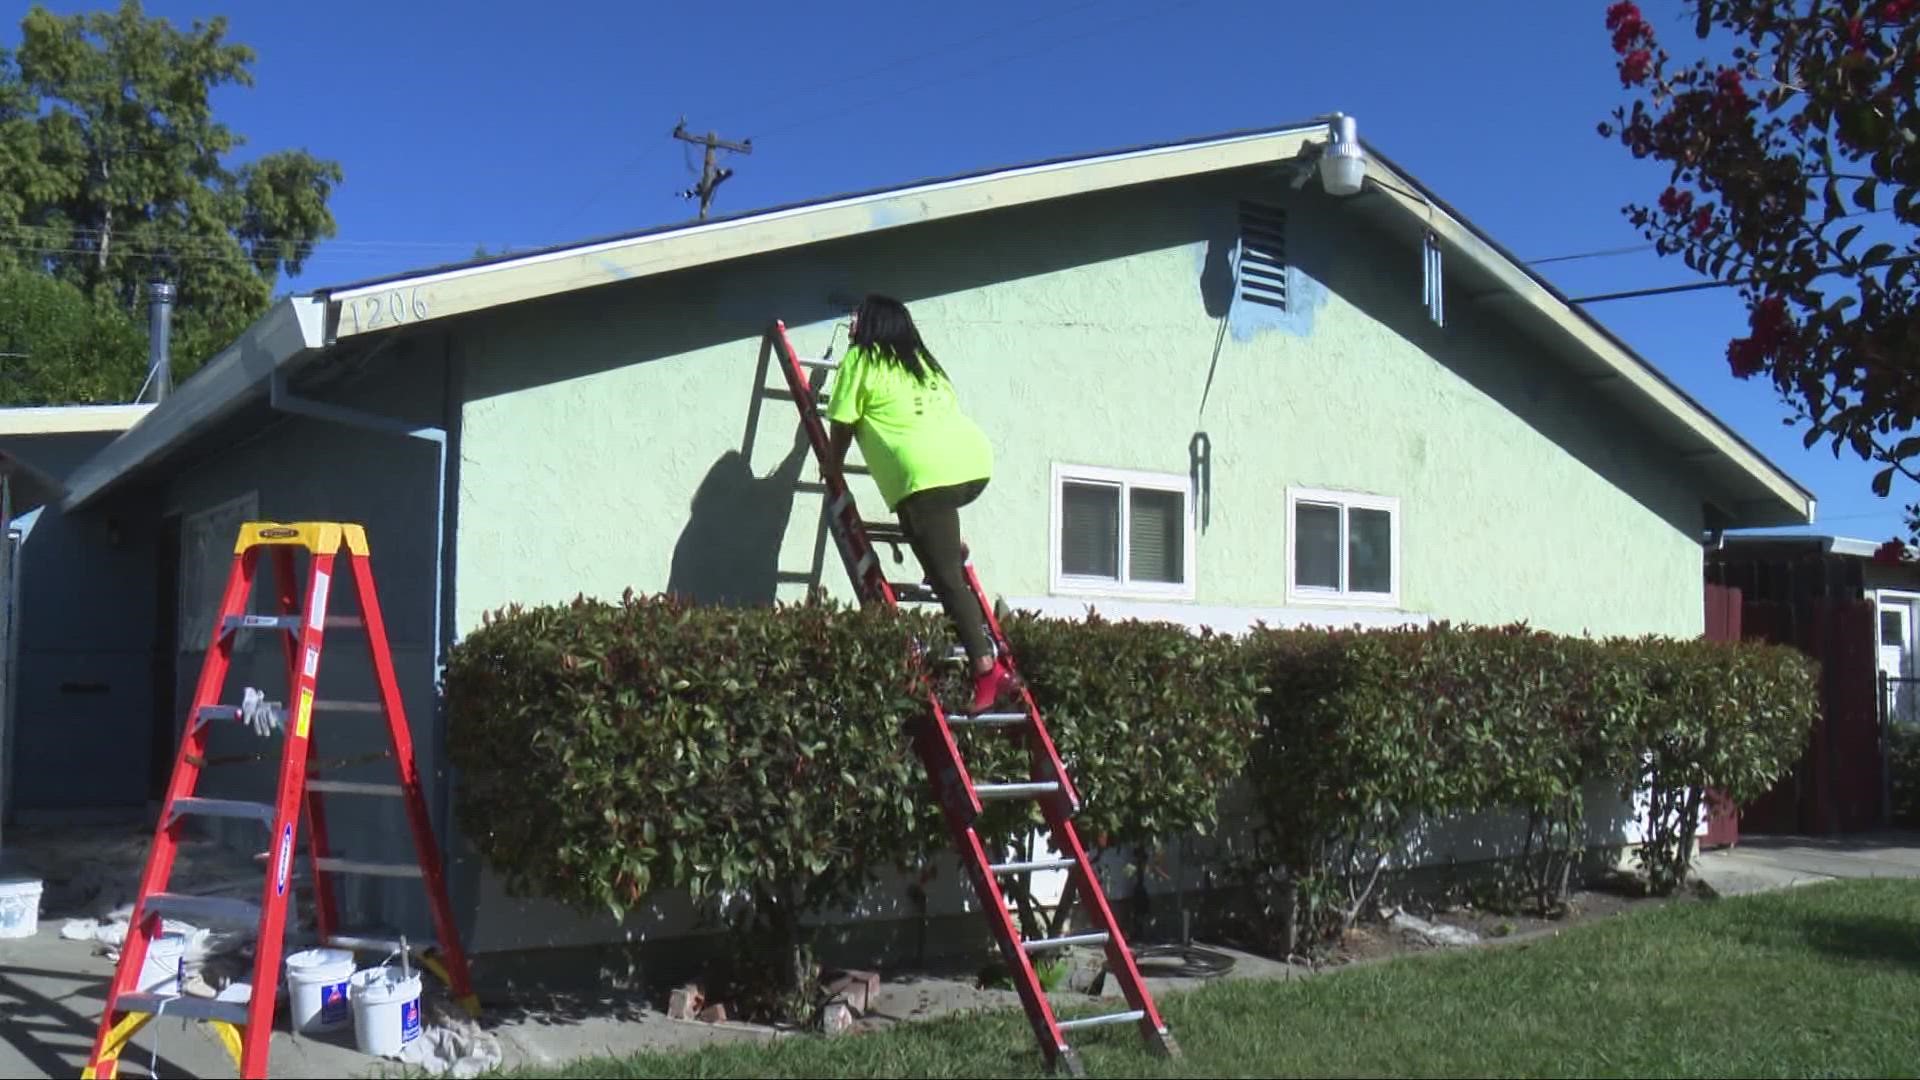 The city of West Sacramento is spending $250,000 to spruce up homes in the Bryte and Broderick neighborhoods.